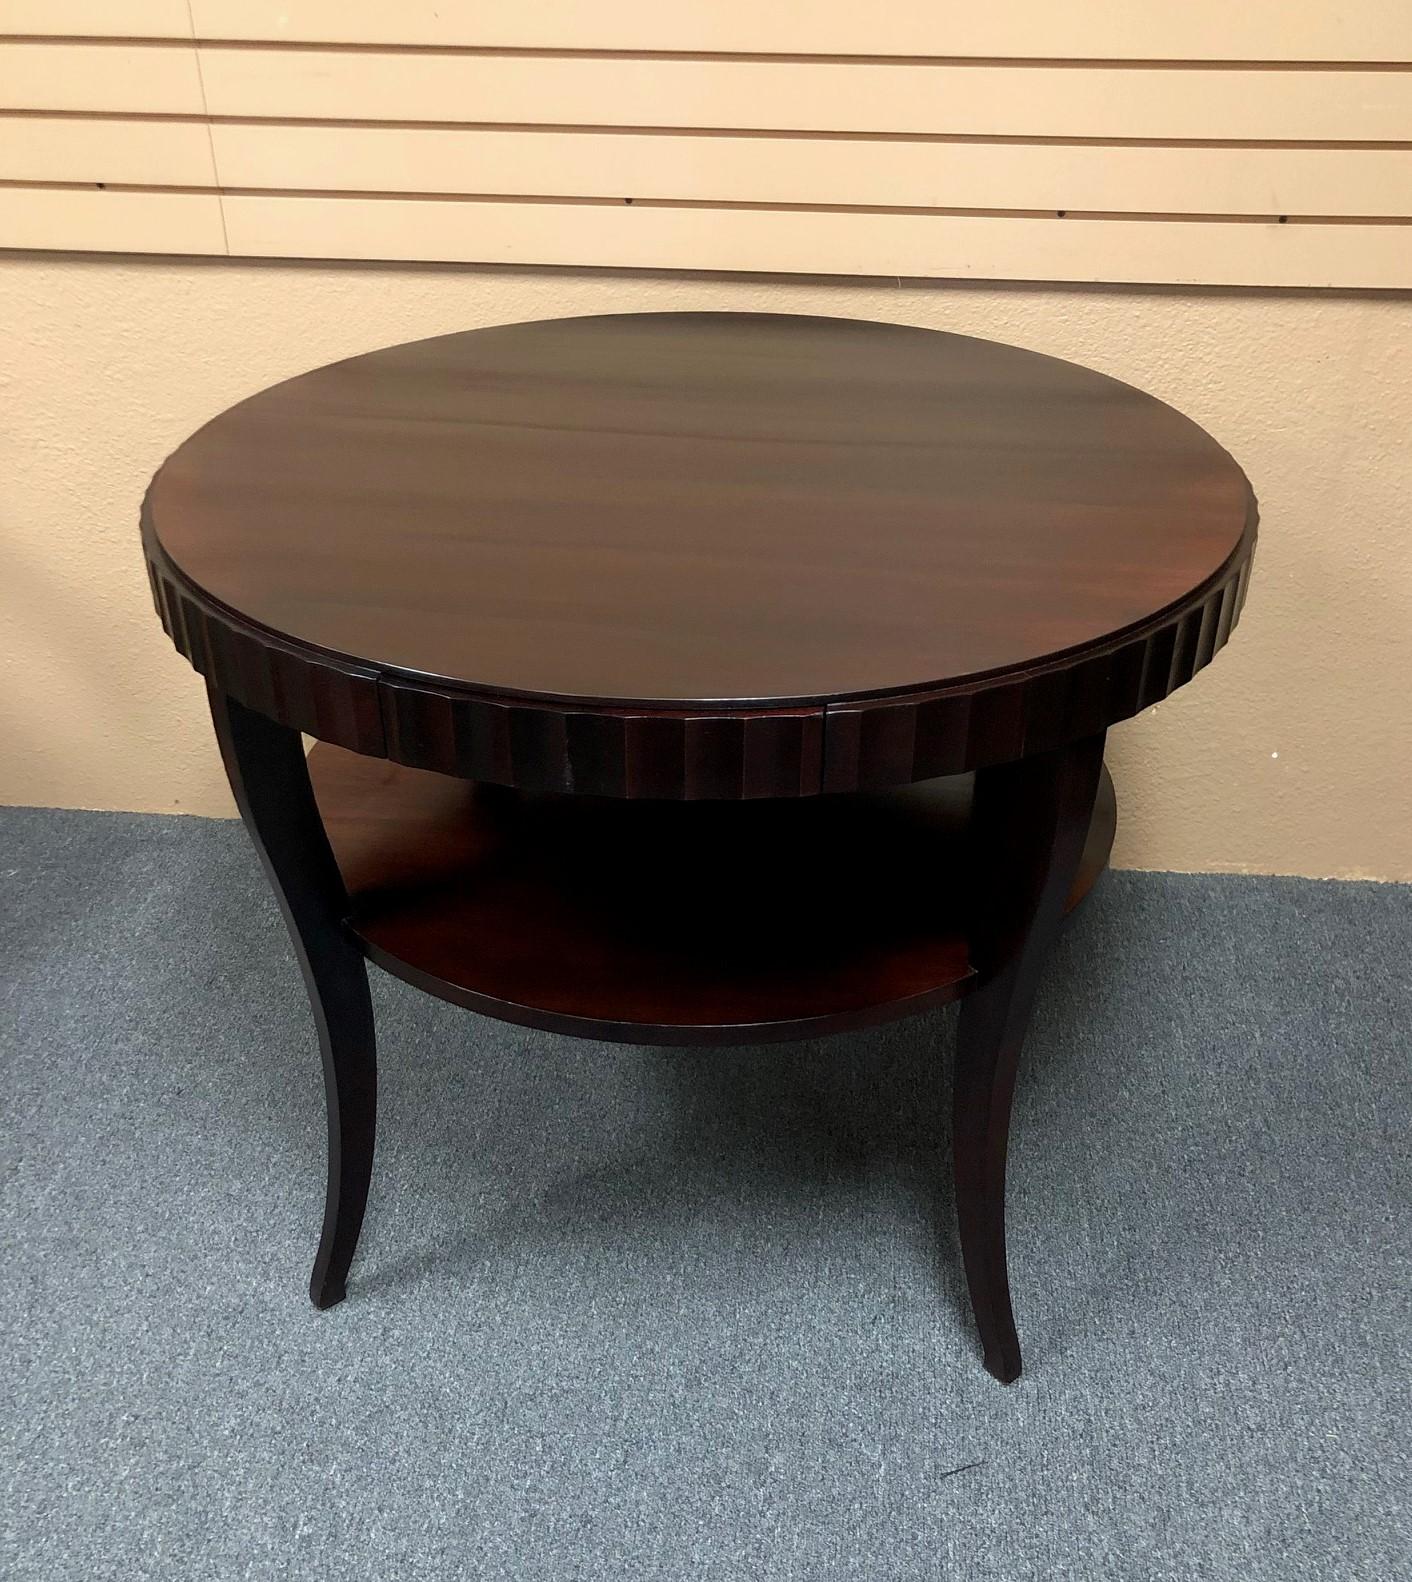 Gorgeous fluted edge round entry table by Barbara Barry for Baker. The table has a java mahogany finish and has been professionally refinished; it is in like new condition. The dimensions are 38